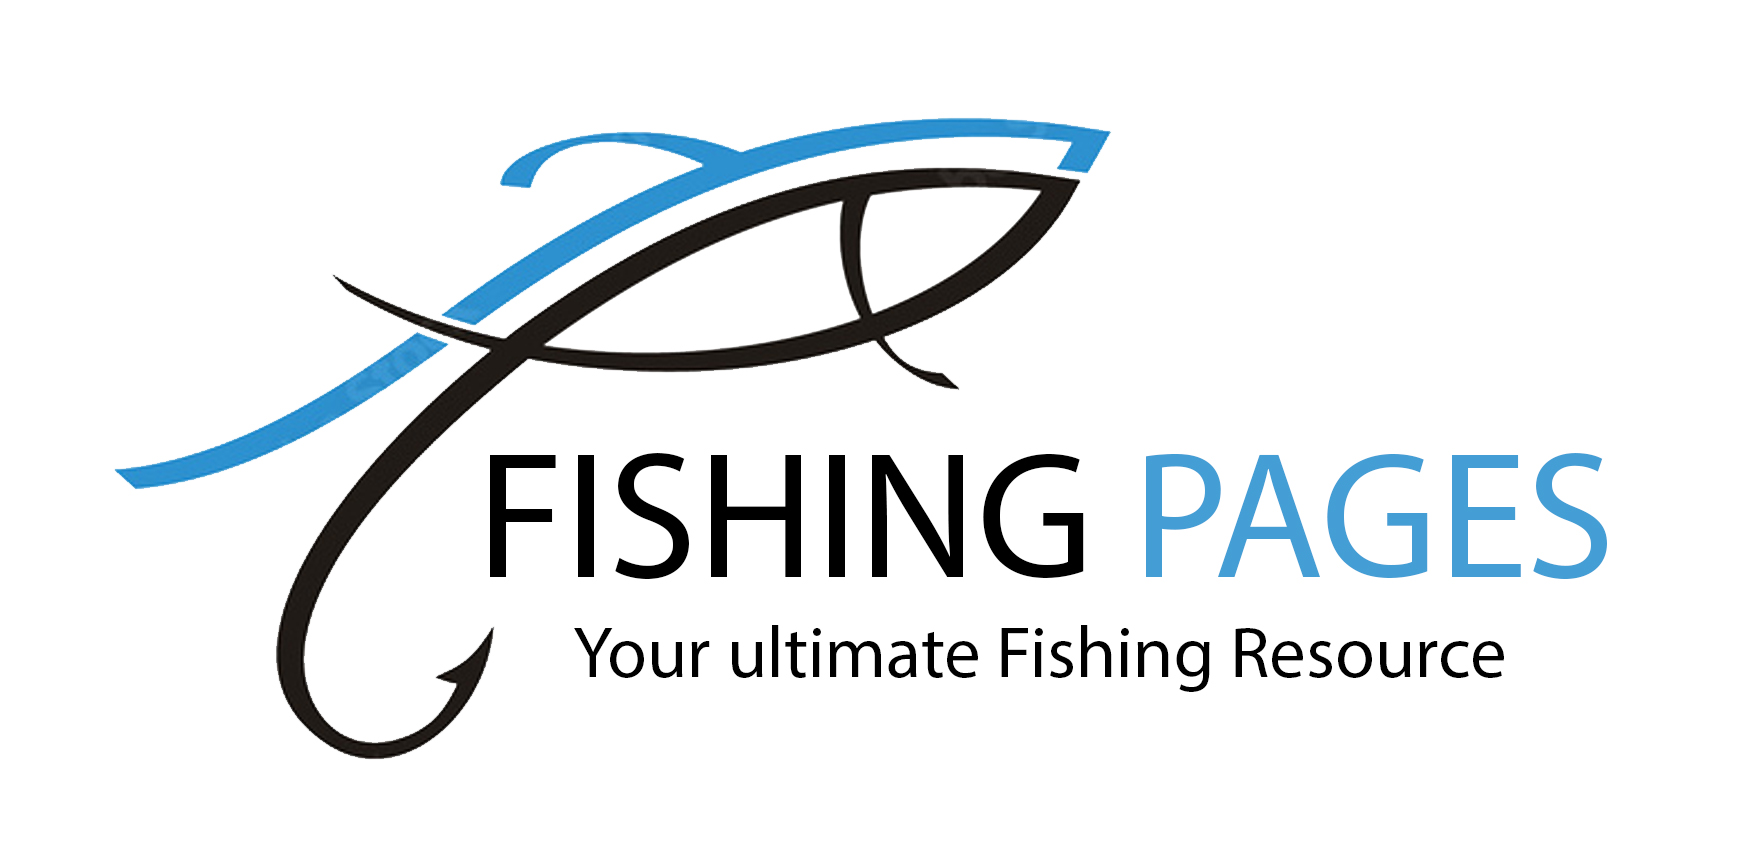 Register as a FishingPages Member